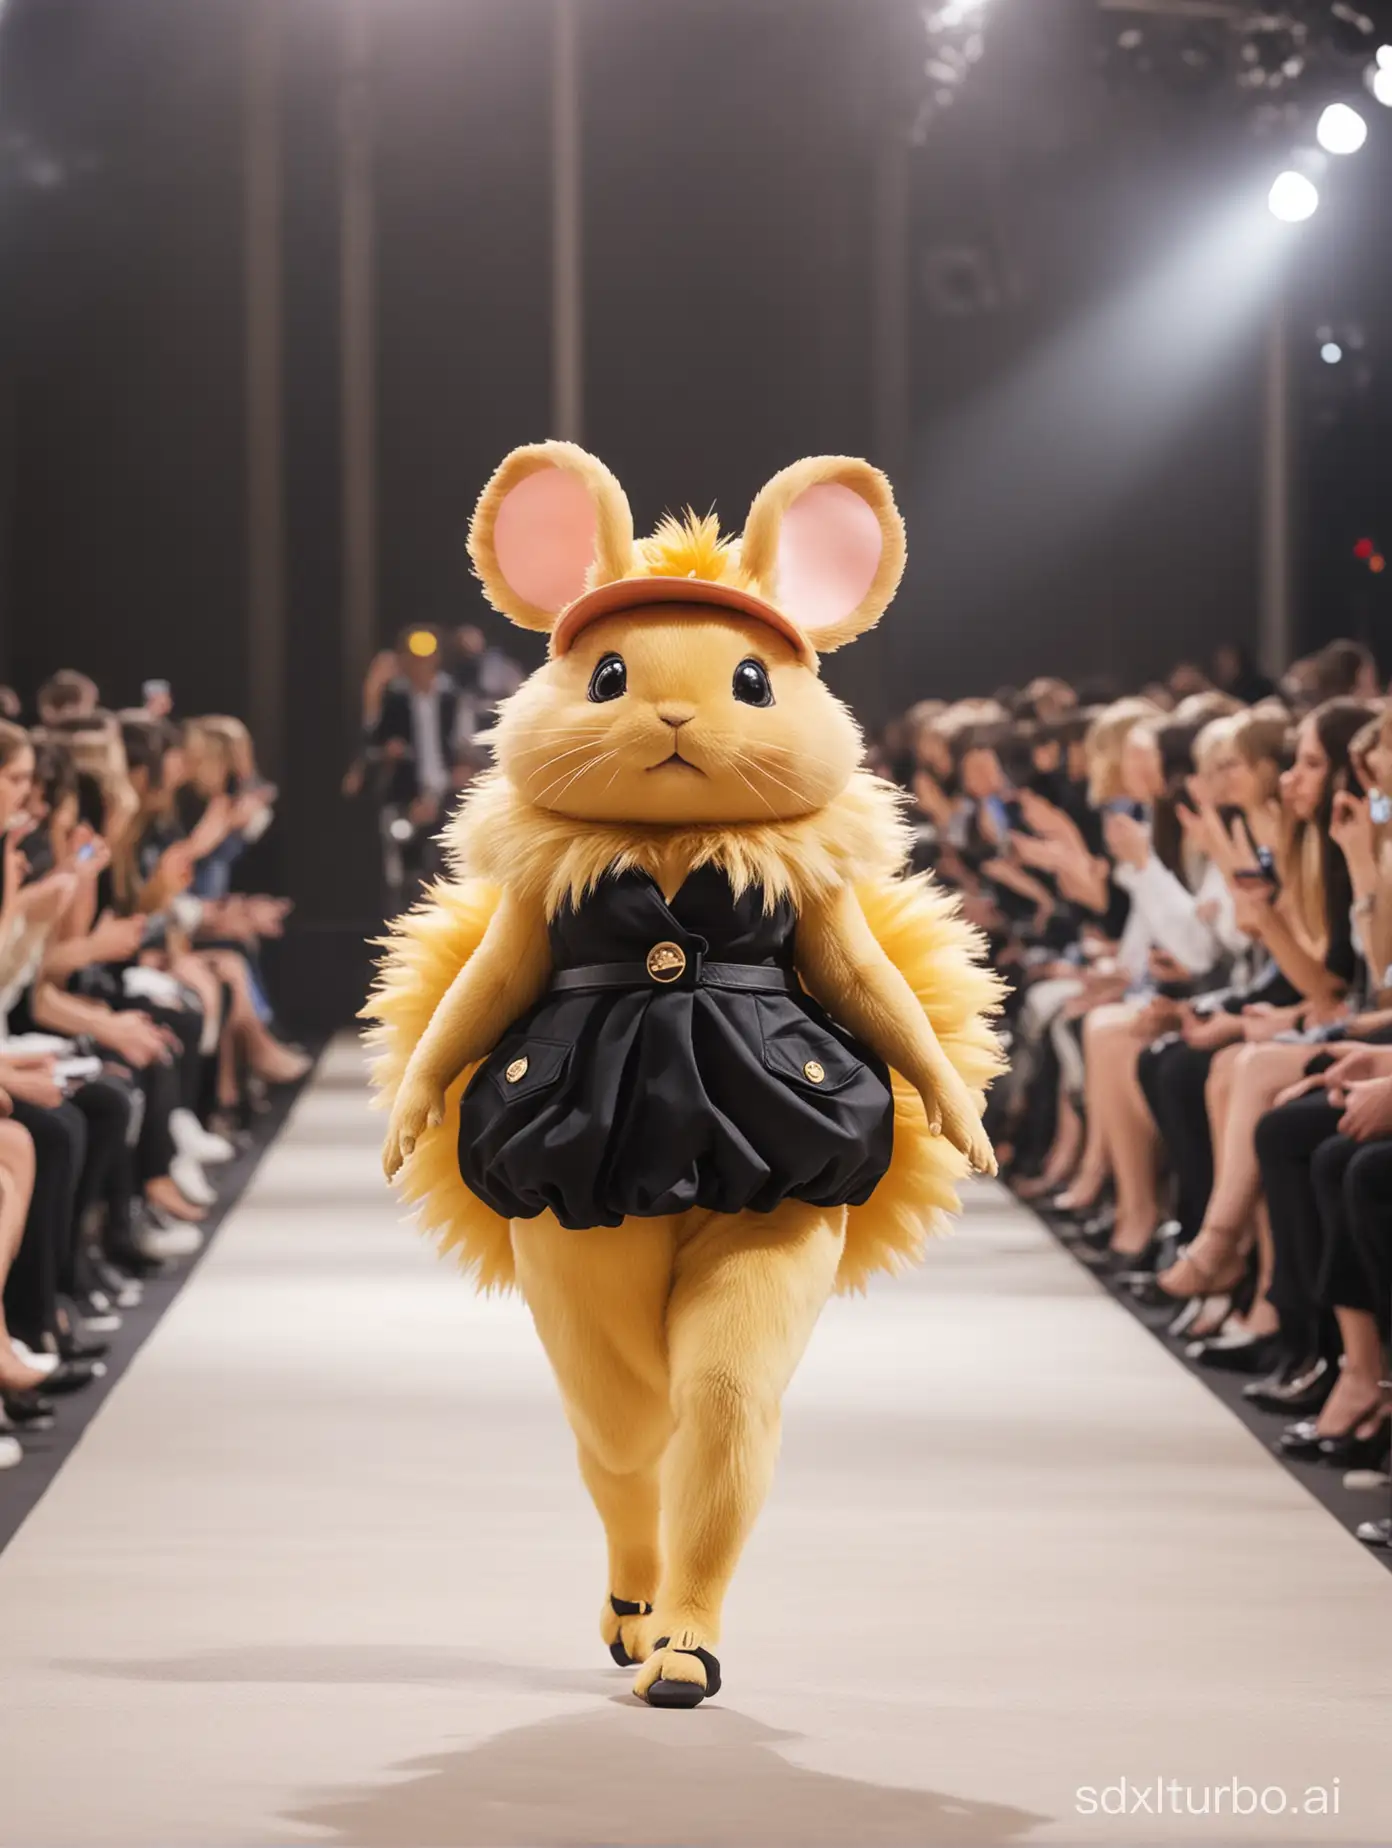 In the Paris Collection, Dedenne from Pokémon walks the runway, a real Dedenne, walking, (full body image), (audience on both sides), Paris Collection runway, real pocket monsters, ultra-delicate photos, Paris Collection runway, (eccentric fashion), outrageous fashion, flashy fashion, Paris Collection